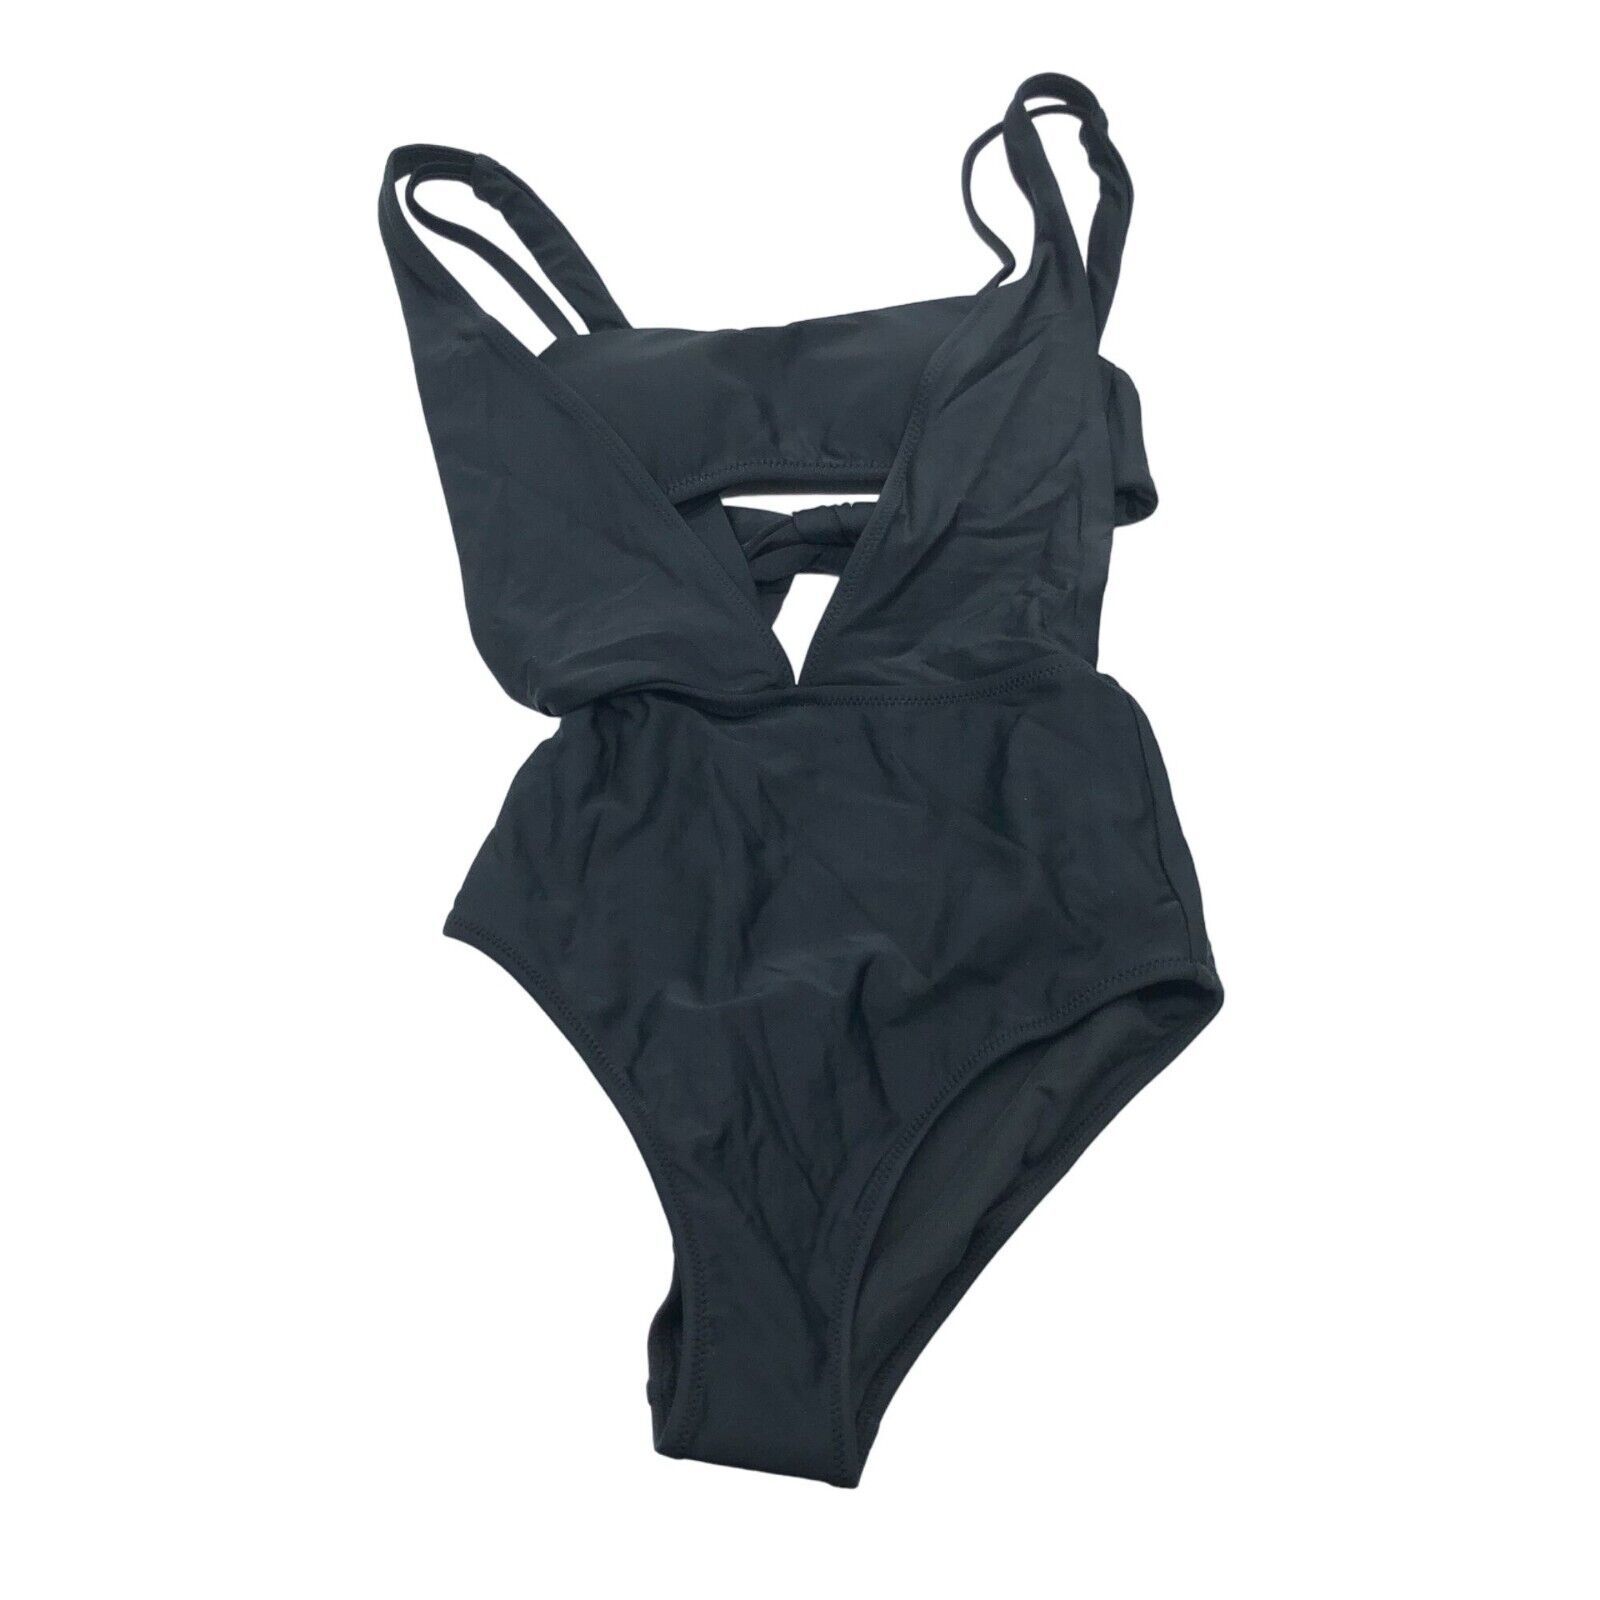 Primary image for Aerie One Piece Swimsuit Full Coverage Cutouts Tie Back Layered Look Black XXS